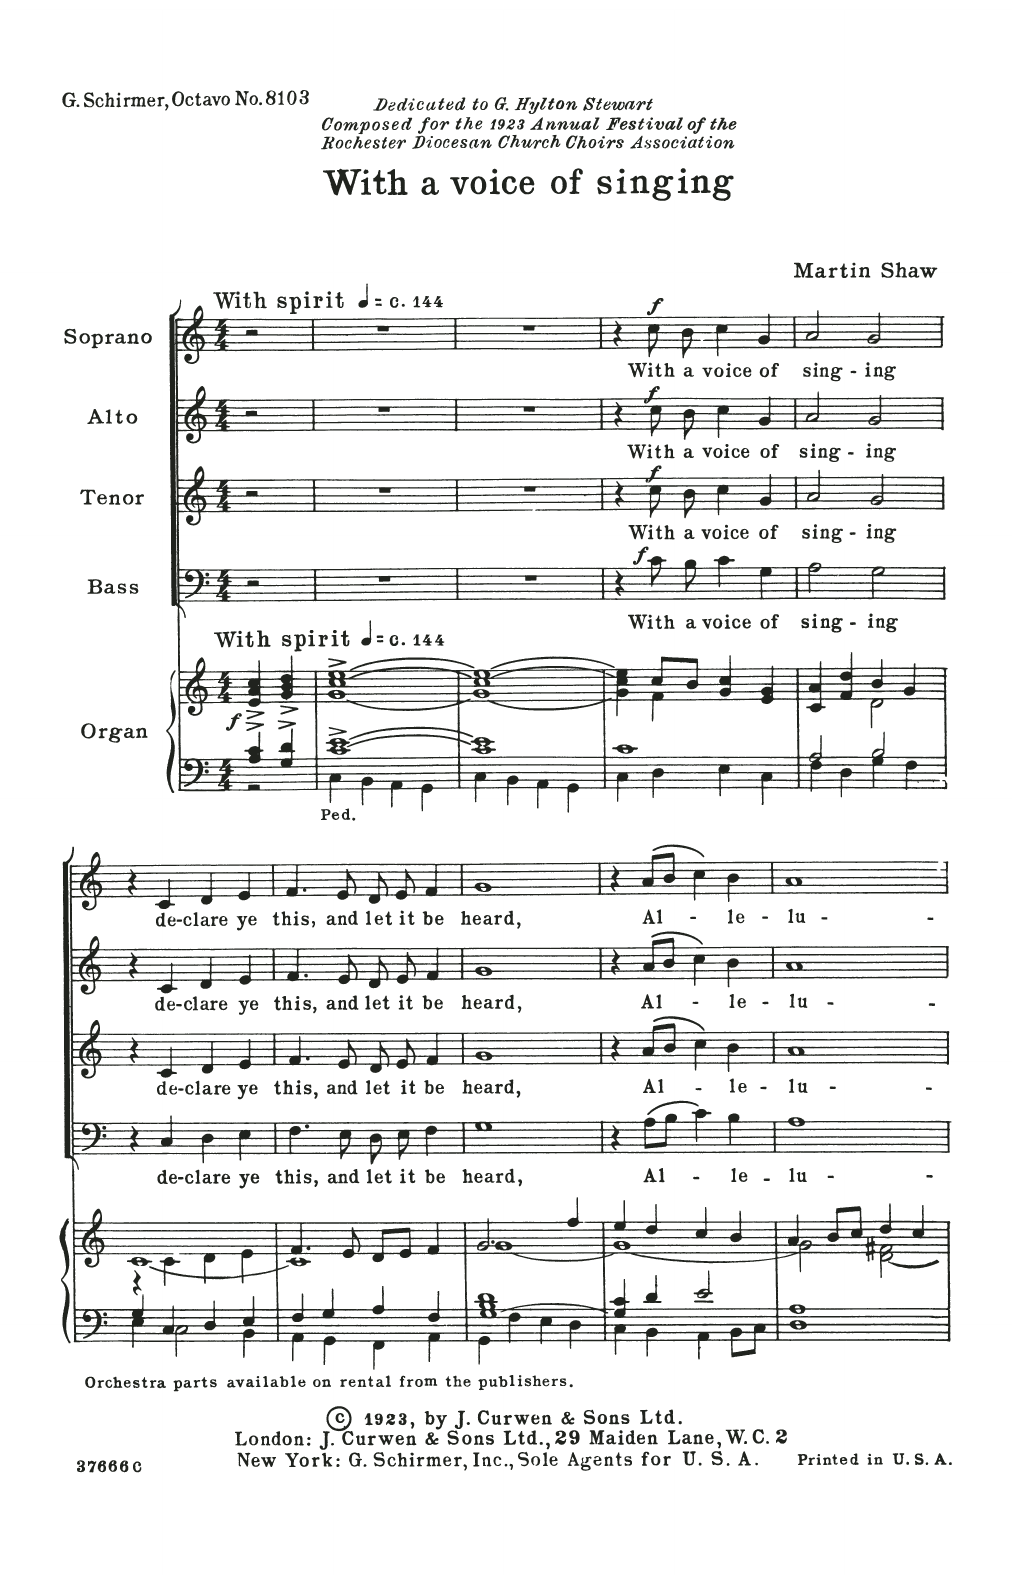 Download M. Shaw With A Voice Of Singing Sheet Music